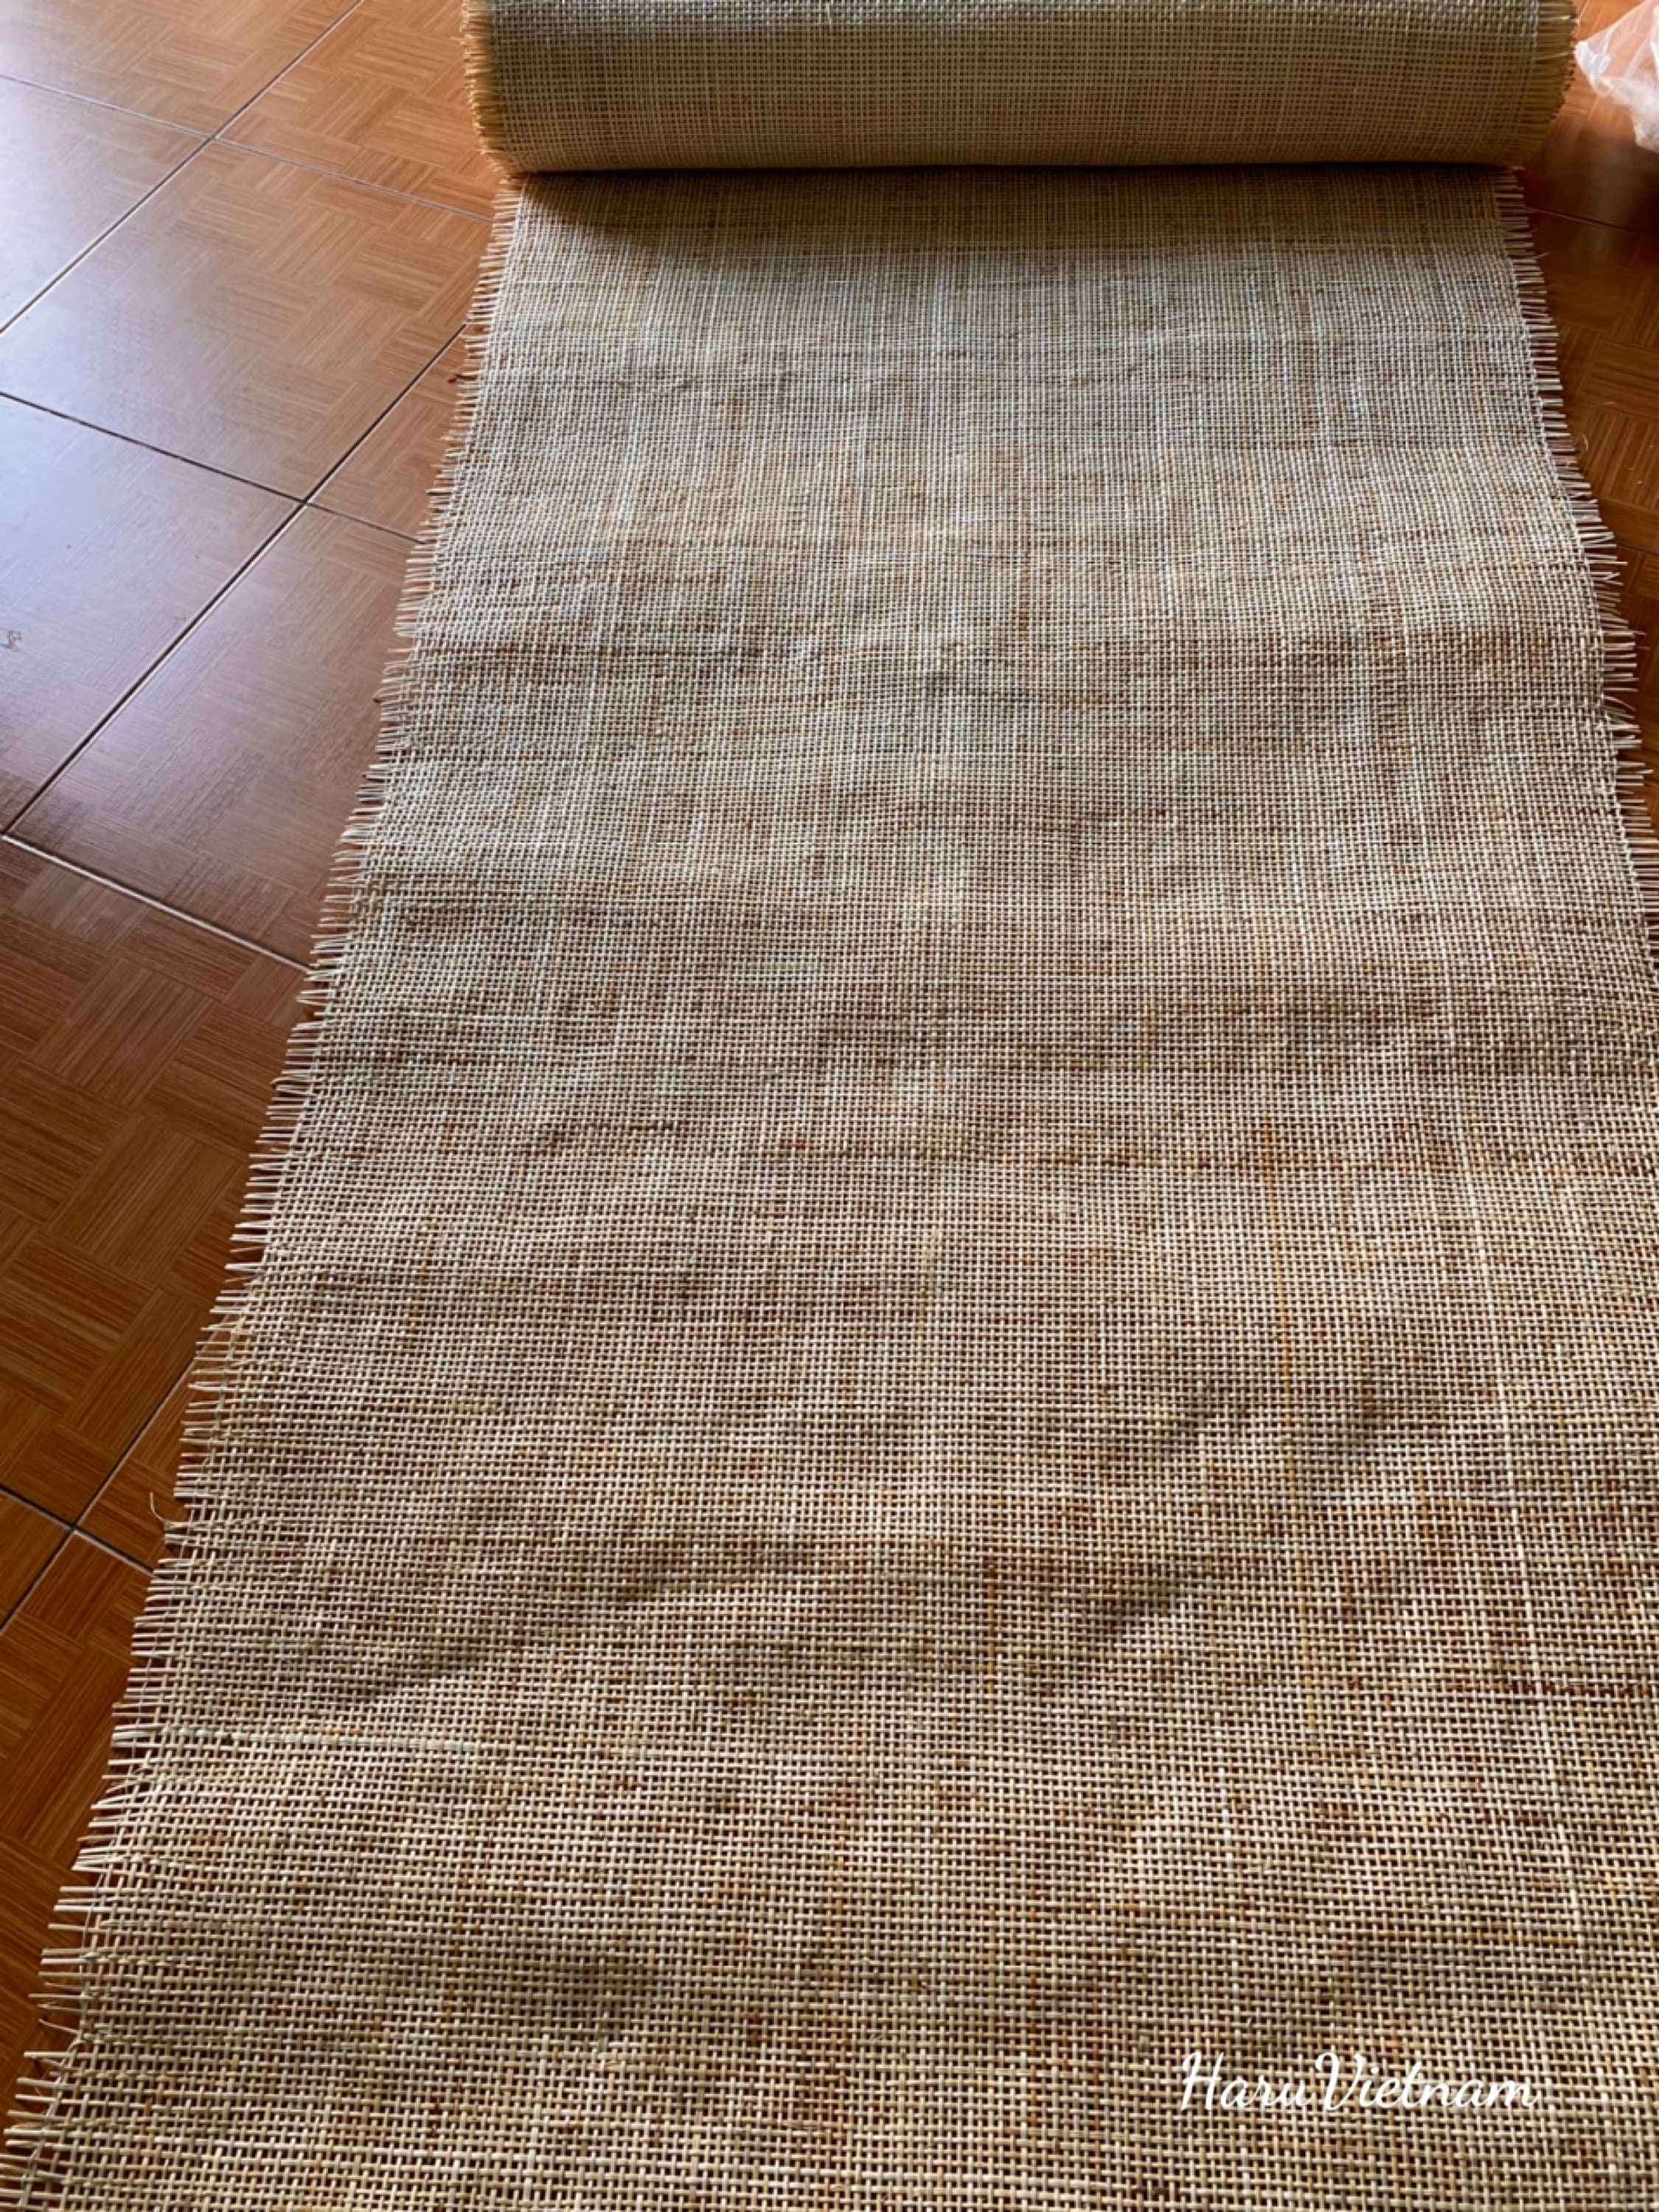 Rattan Cane Webbing Roll for DIY Project Bleached Cane Fabric